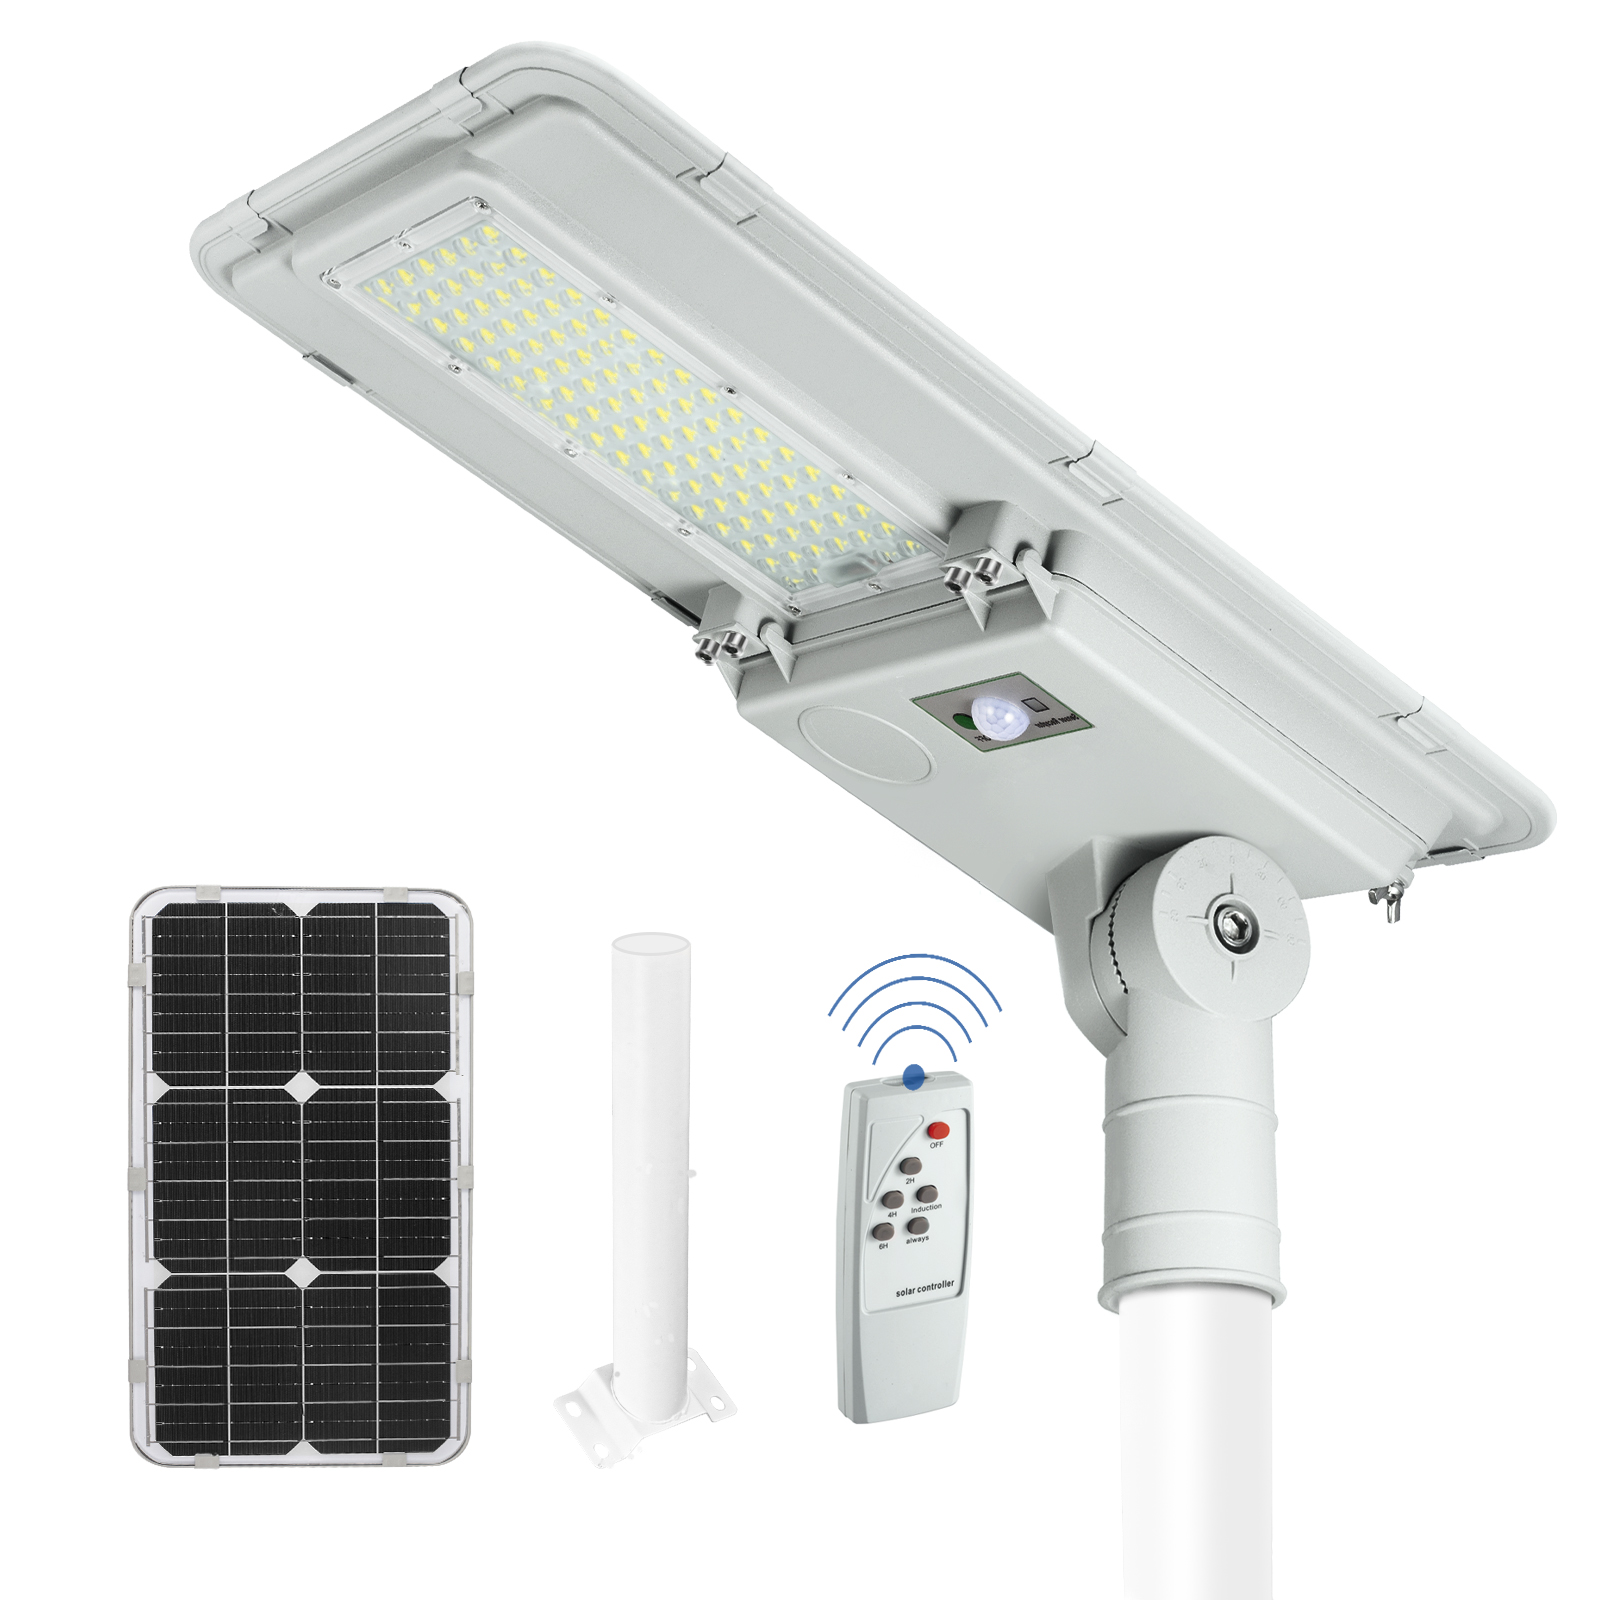 High quality outdoor IP65 waterproof solar led street light 100w 180w Featured Image